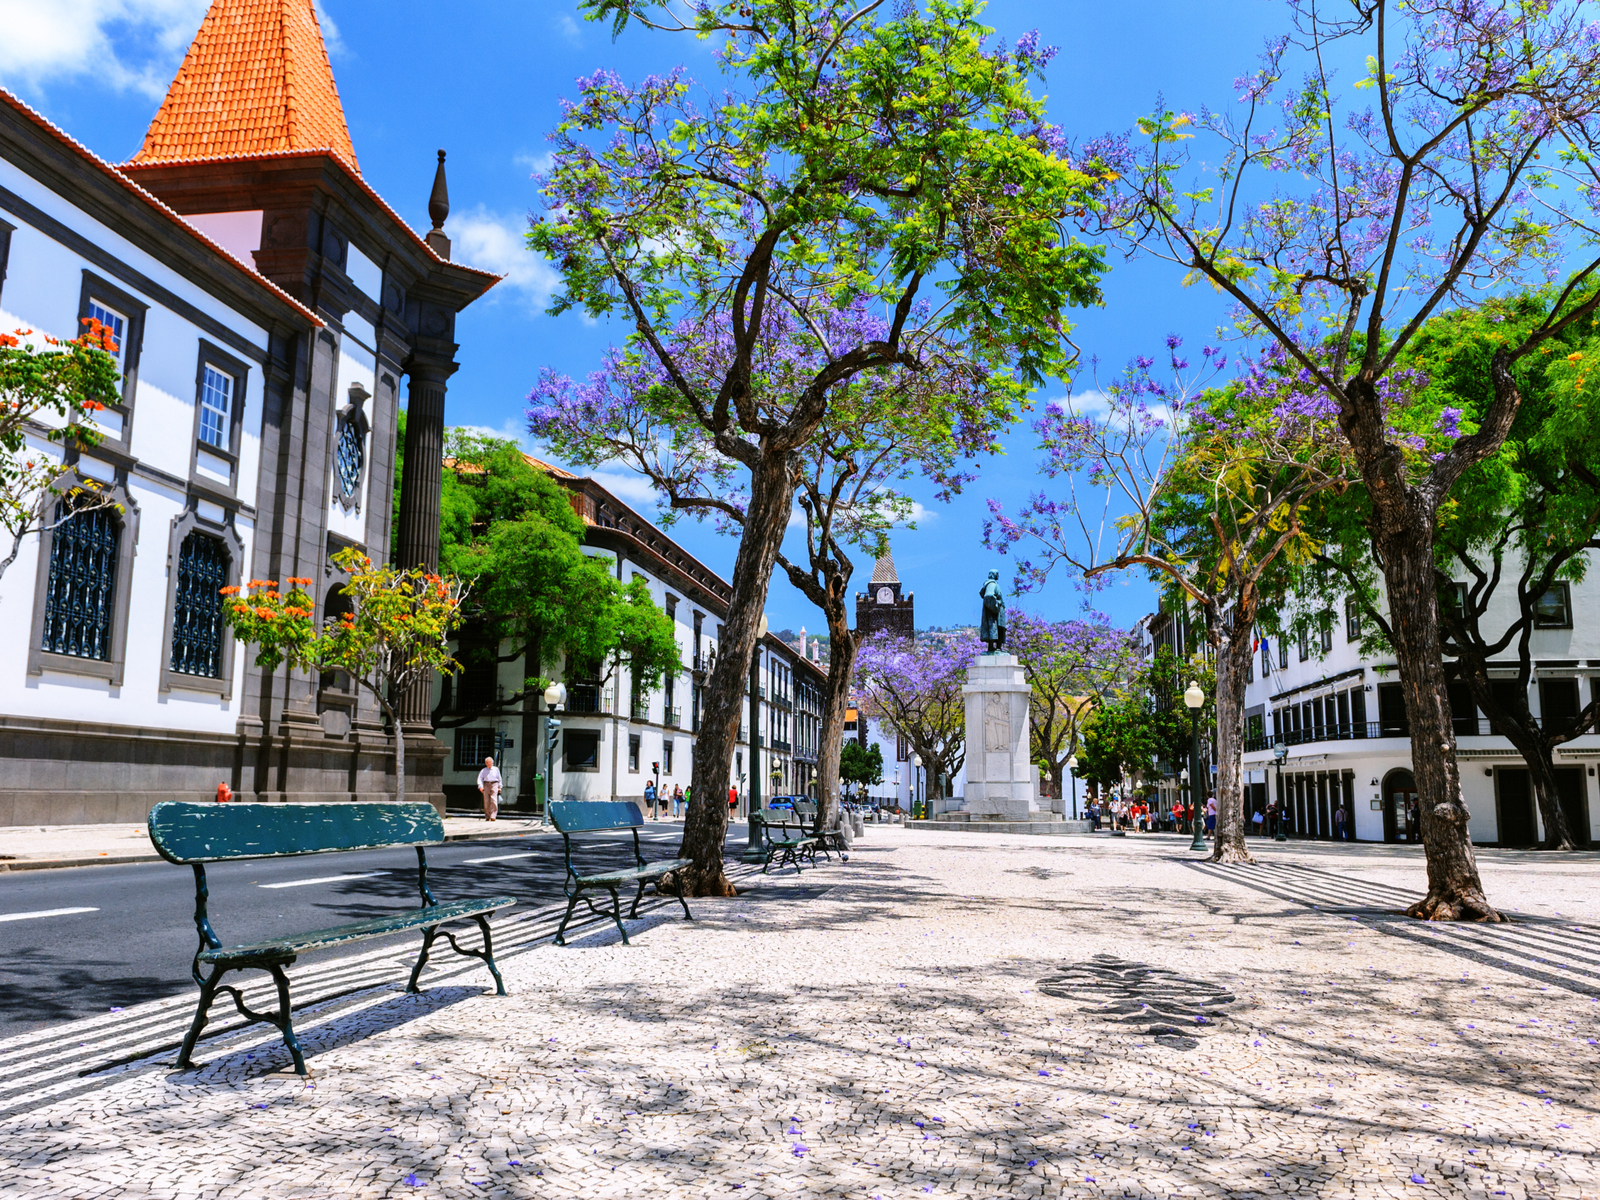 City center view of Funchal, Madeira, one of the best places to visit in Portugal